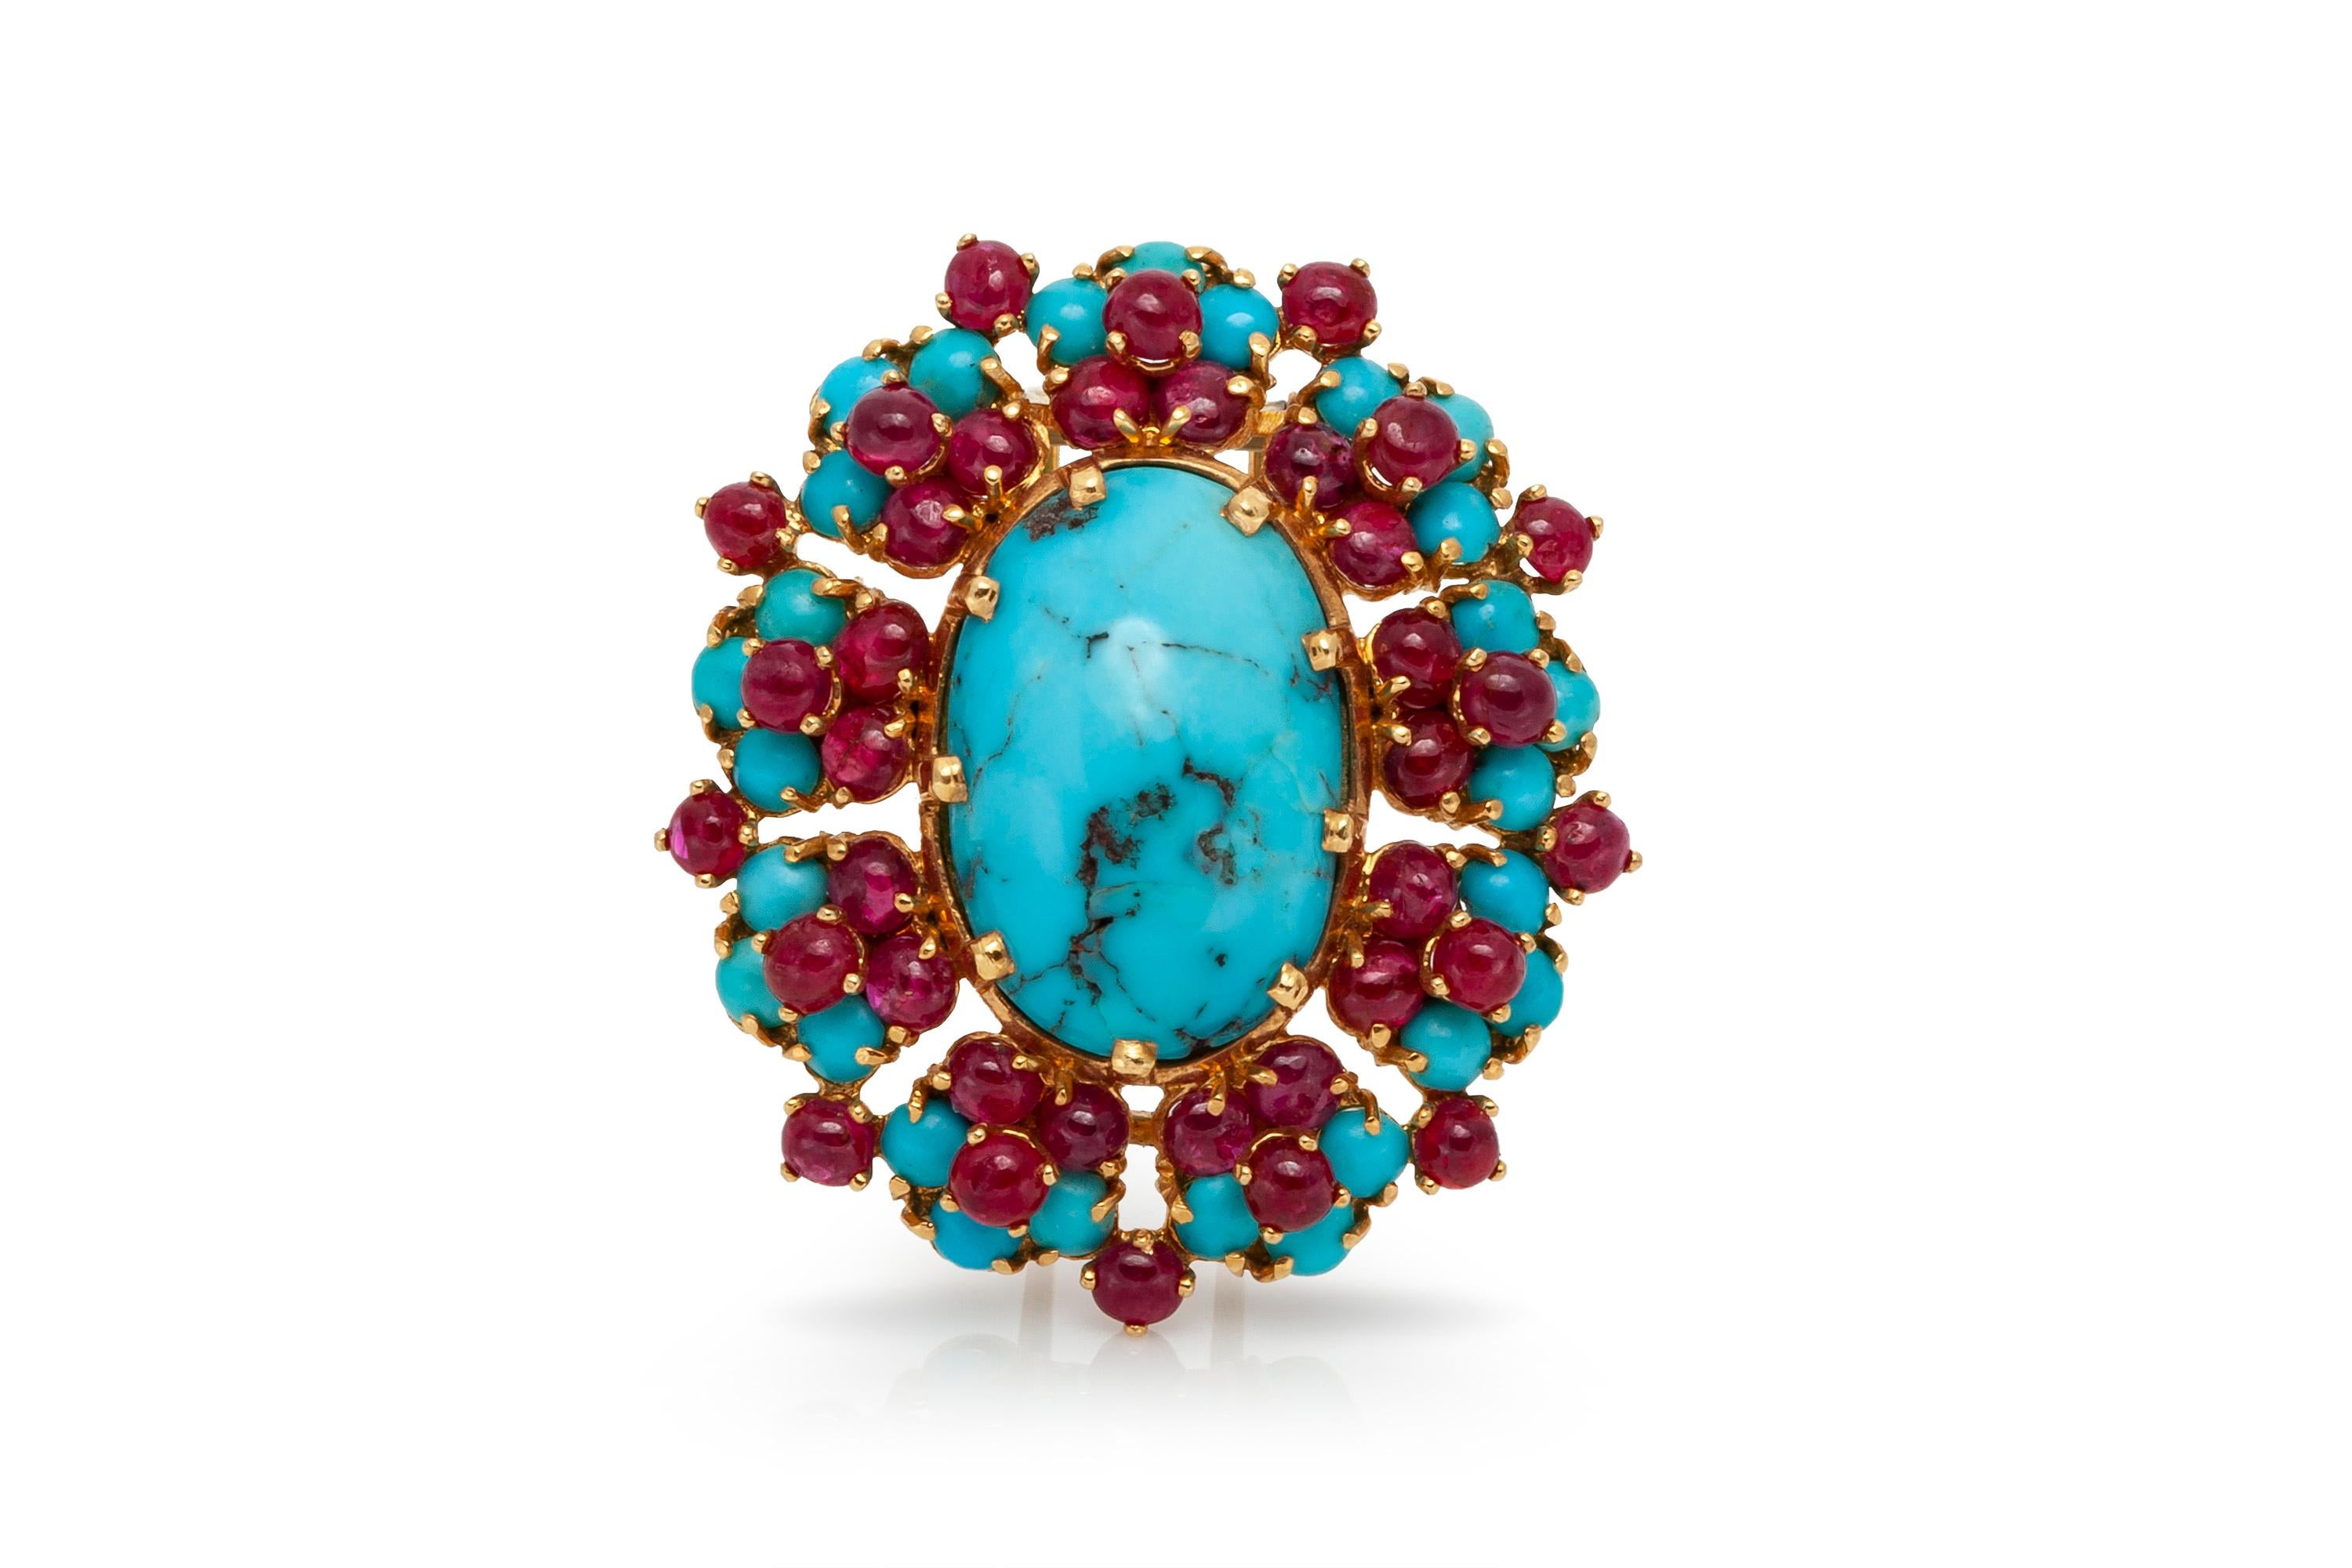 French brooch, finely crafted in 18k yellow gold with rubies and turquois. Circa 1940's.
